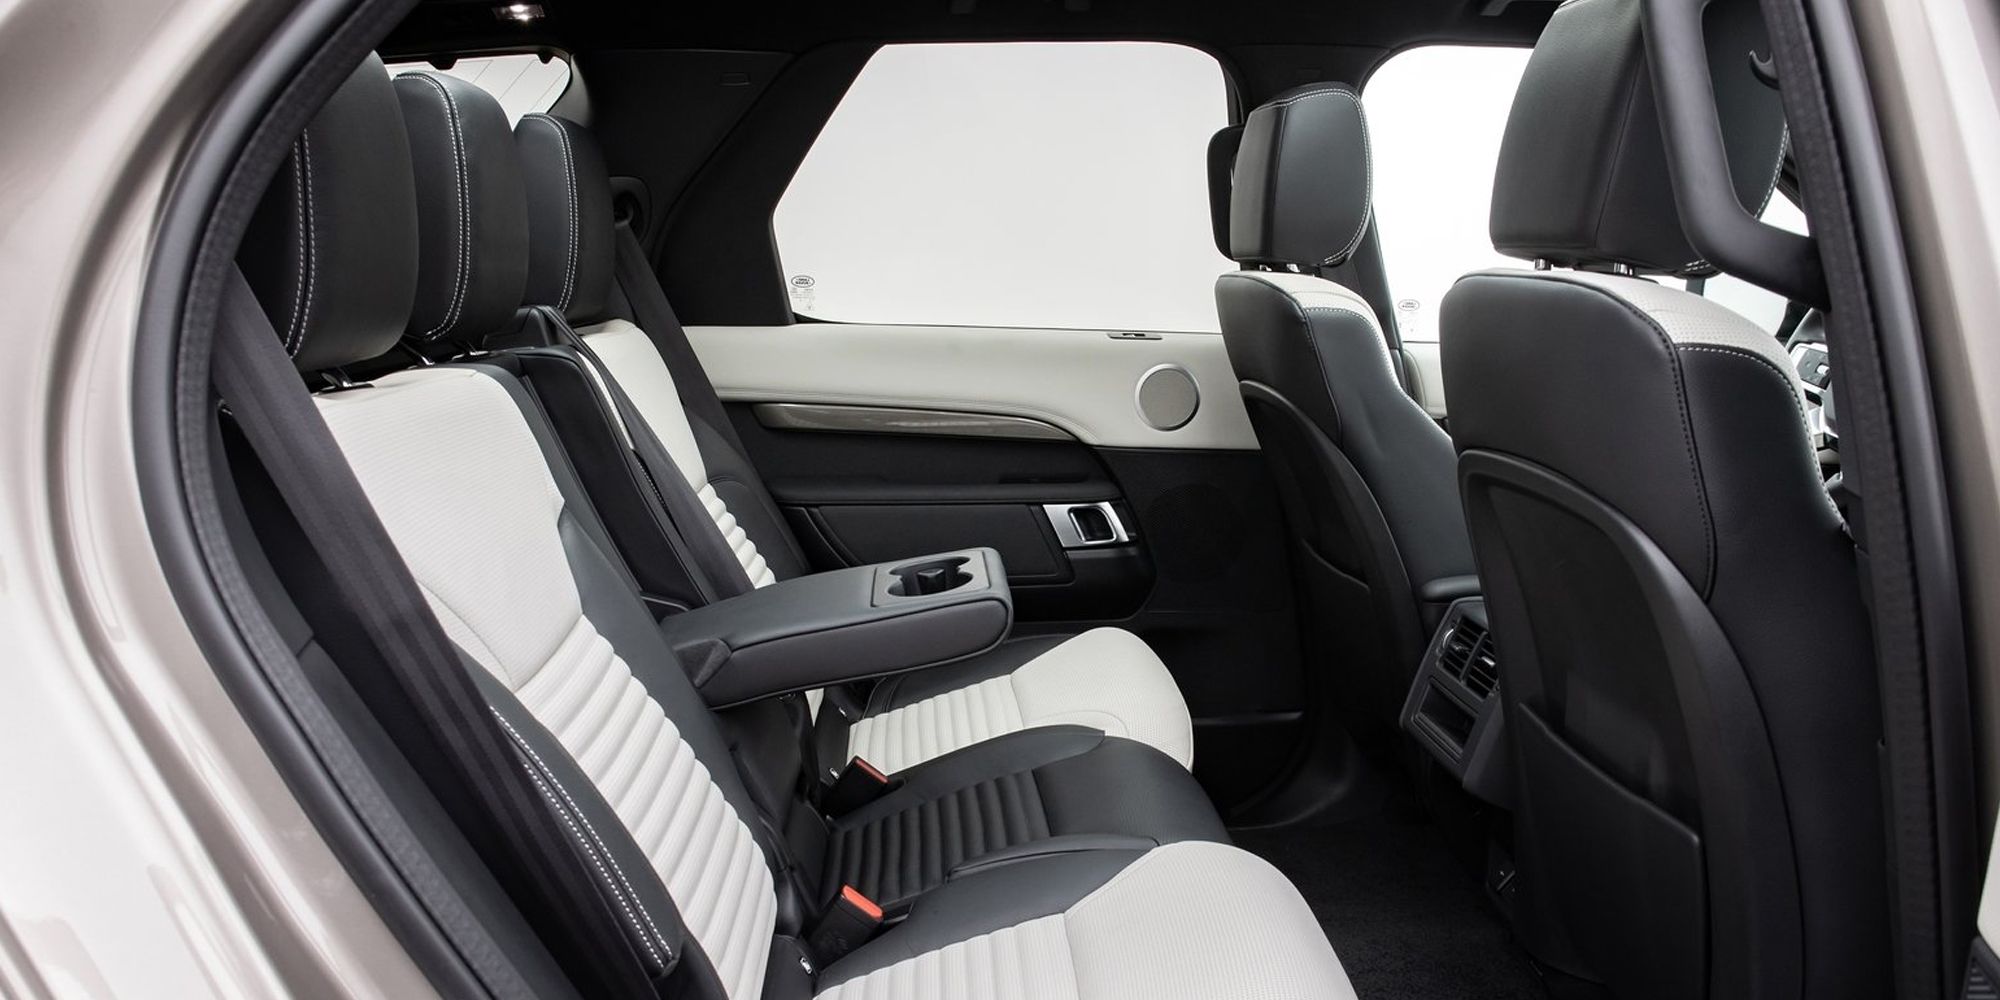 The rear seats in the Discovery